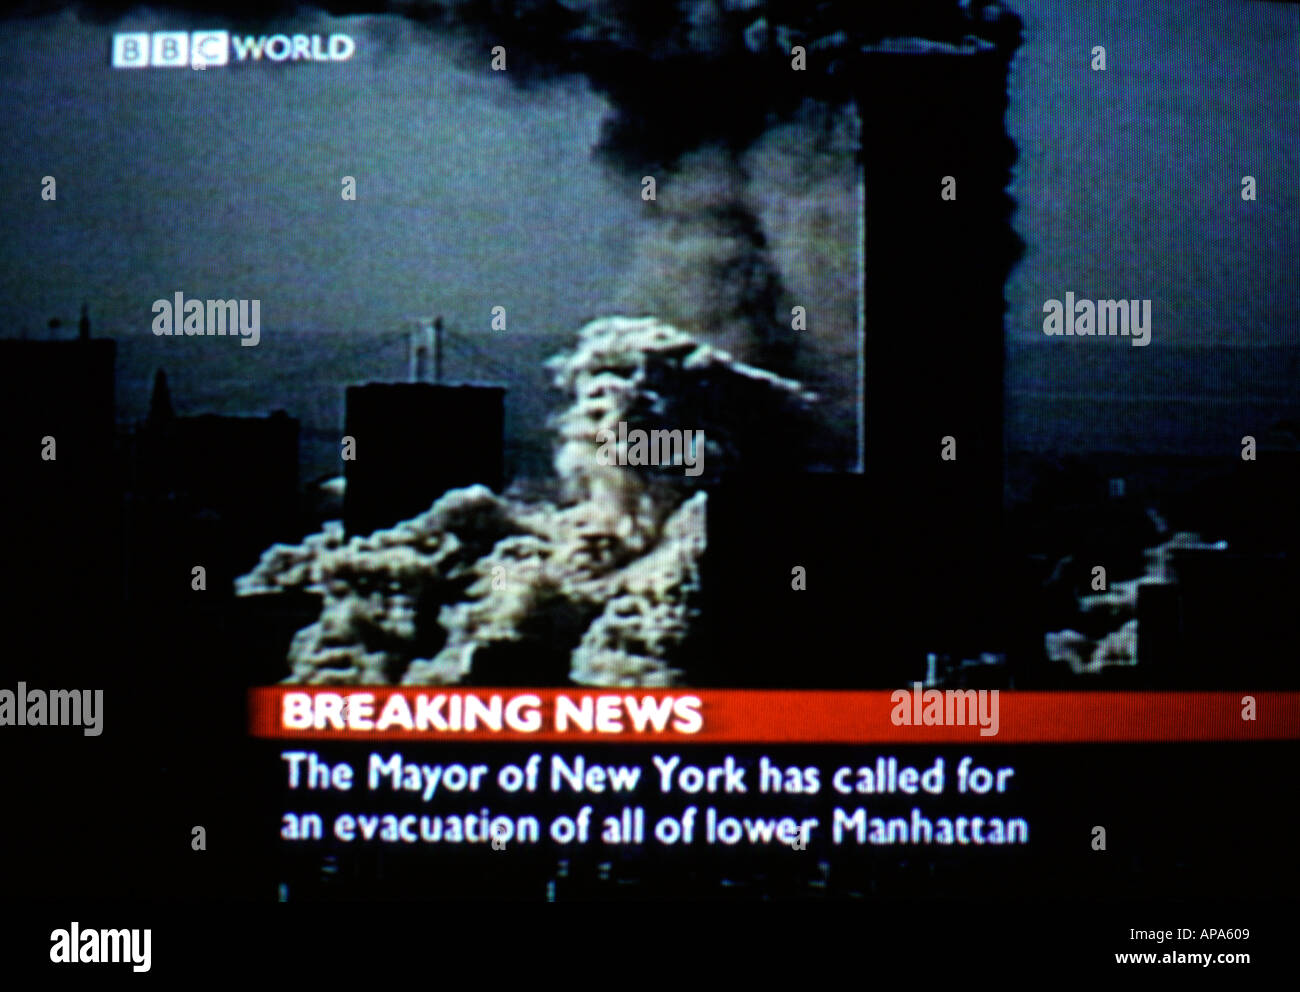 Screen shot of BBC's live coverage of events unfolding in New York during 9/11 in which hijacked planes crashed into the twin towers on September 2001 Stock Photo